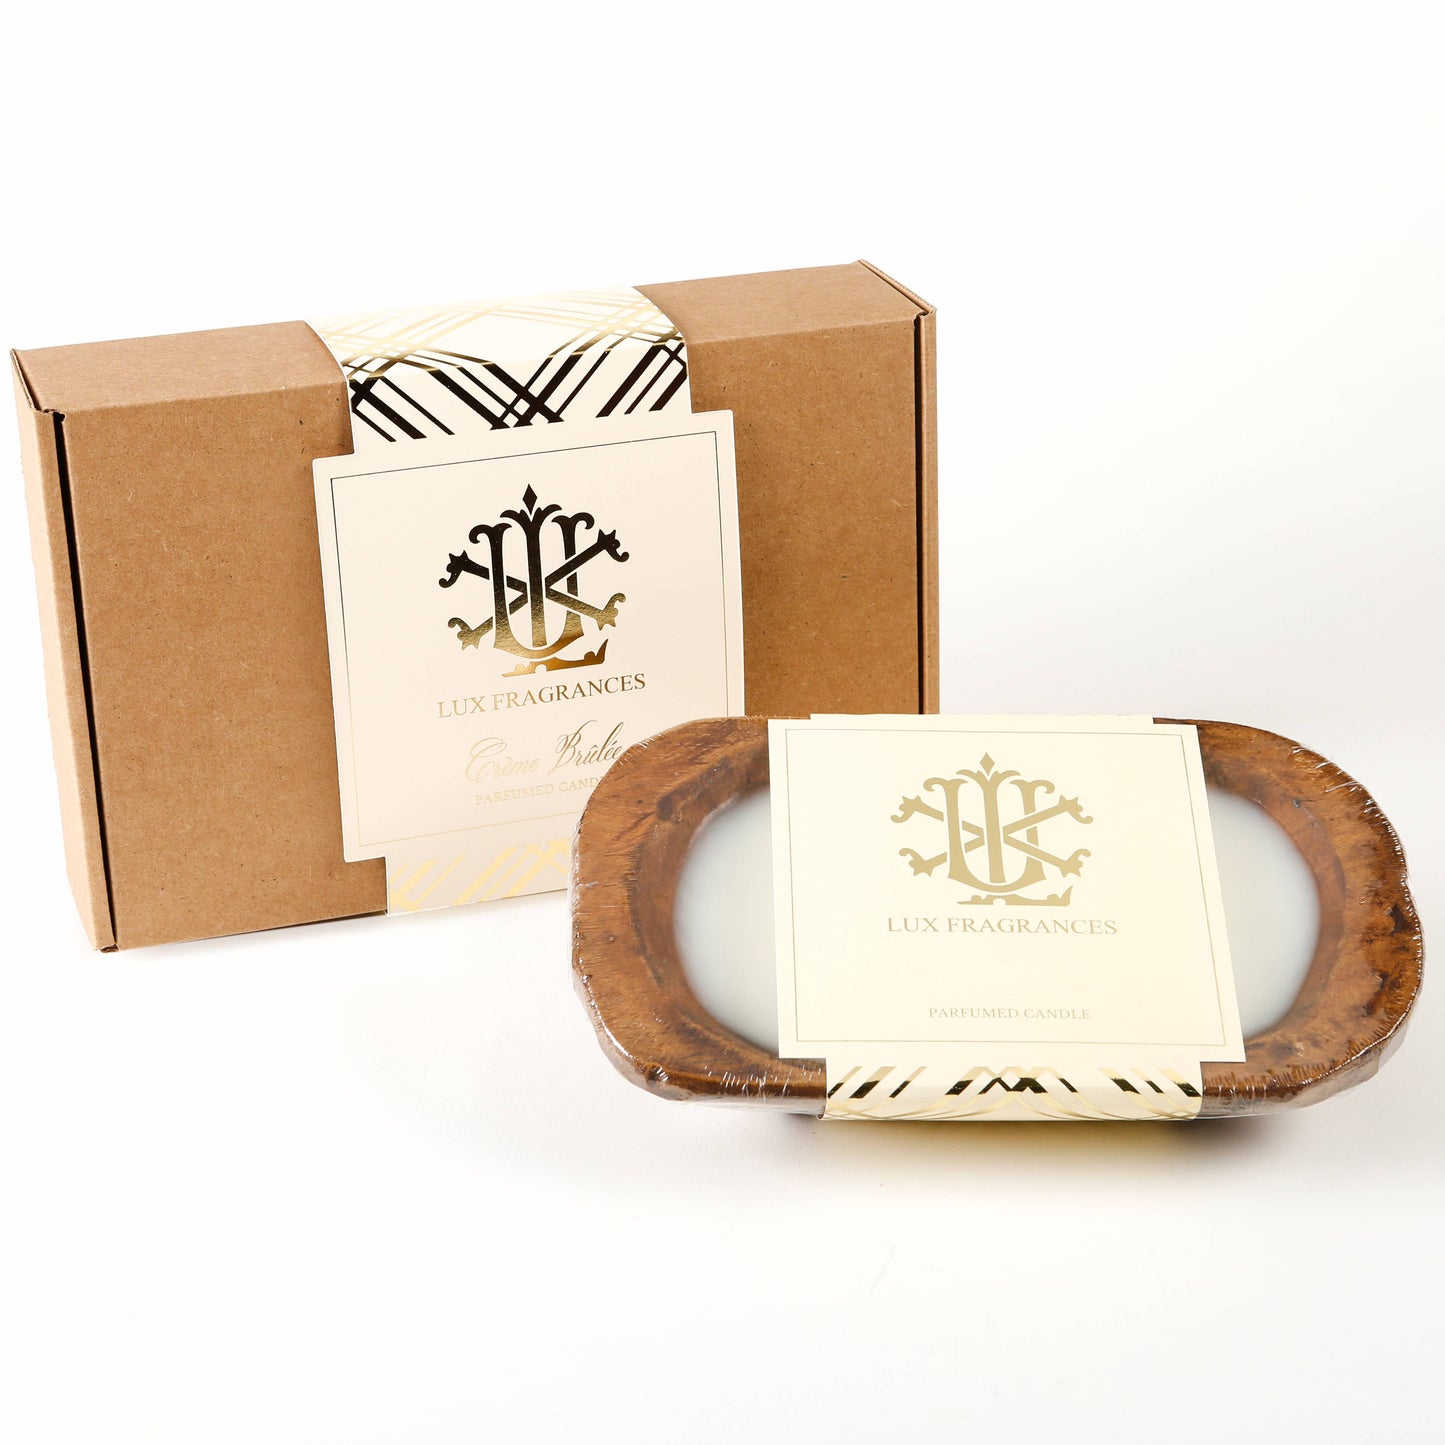 Creme Brulee 3 wick dough bowl Gift Boxed Candle LUX FRAGRANCES